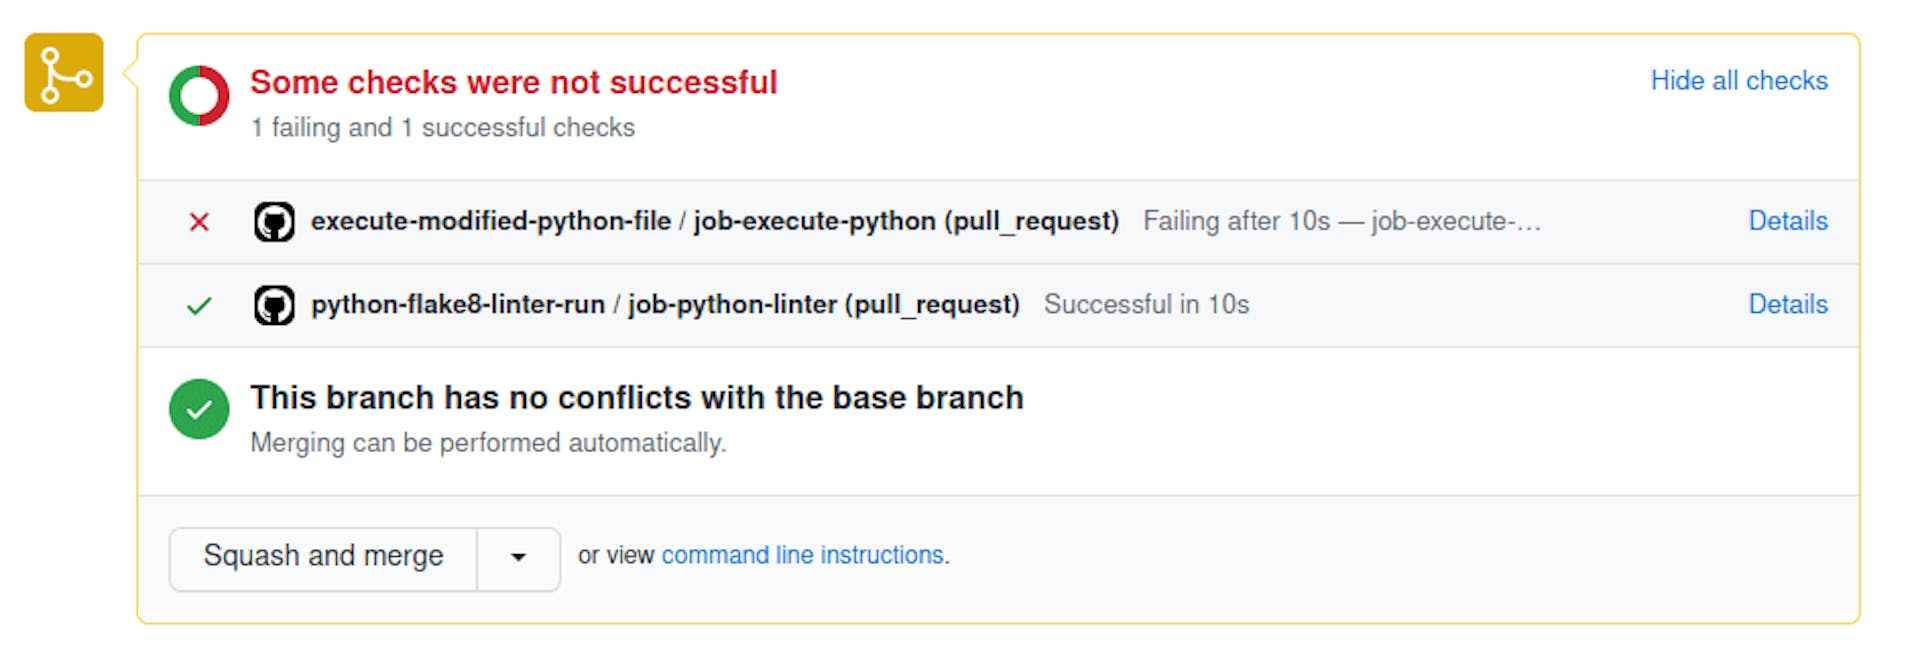 Example result of a GitHub action run showing one pass and one fail.